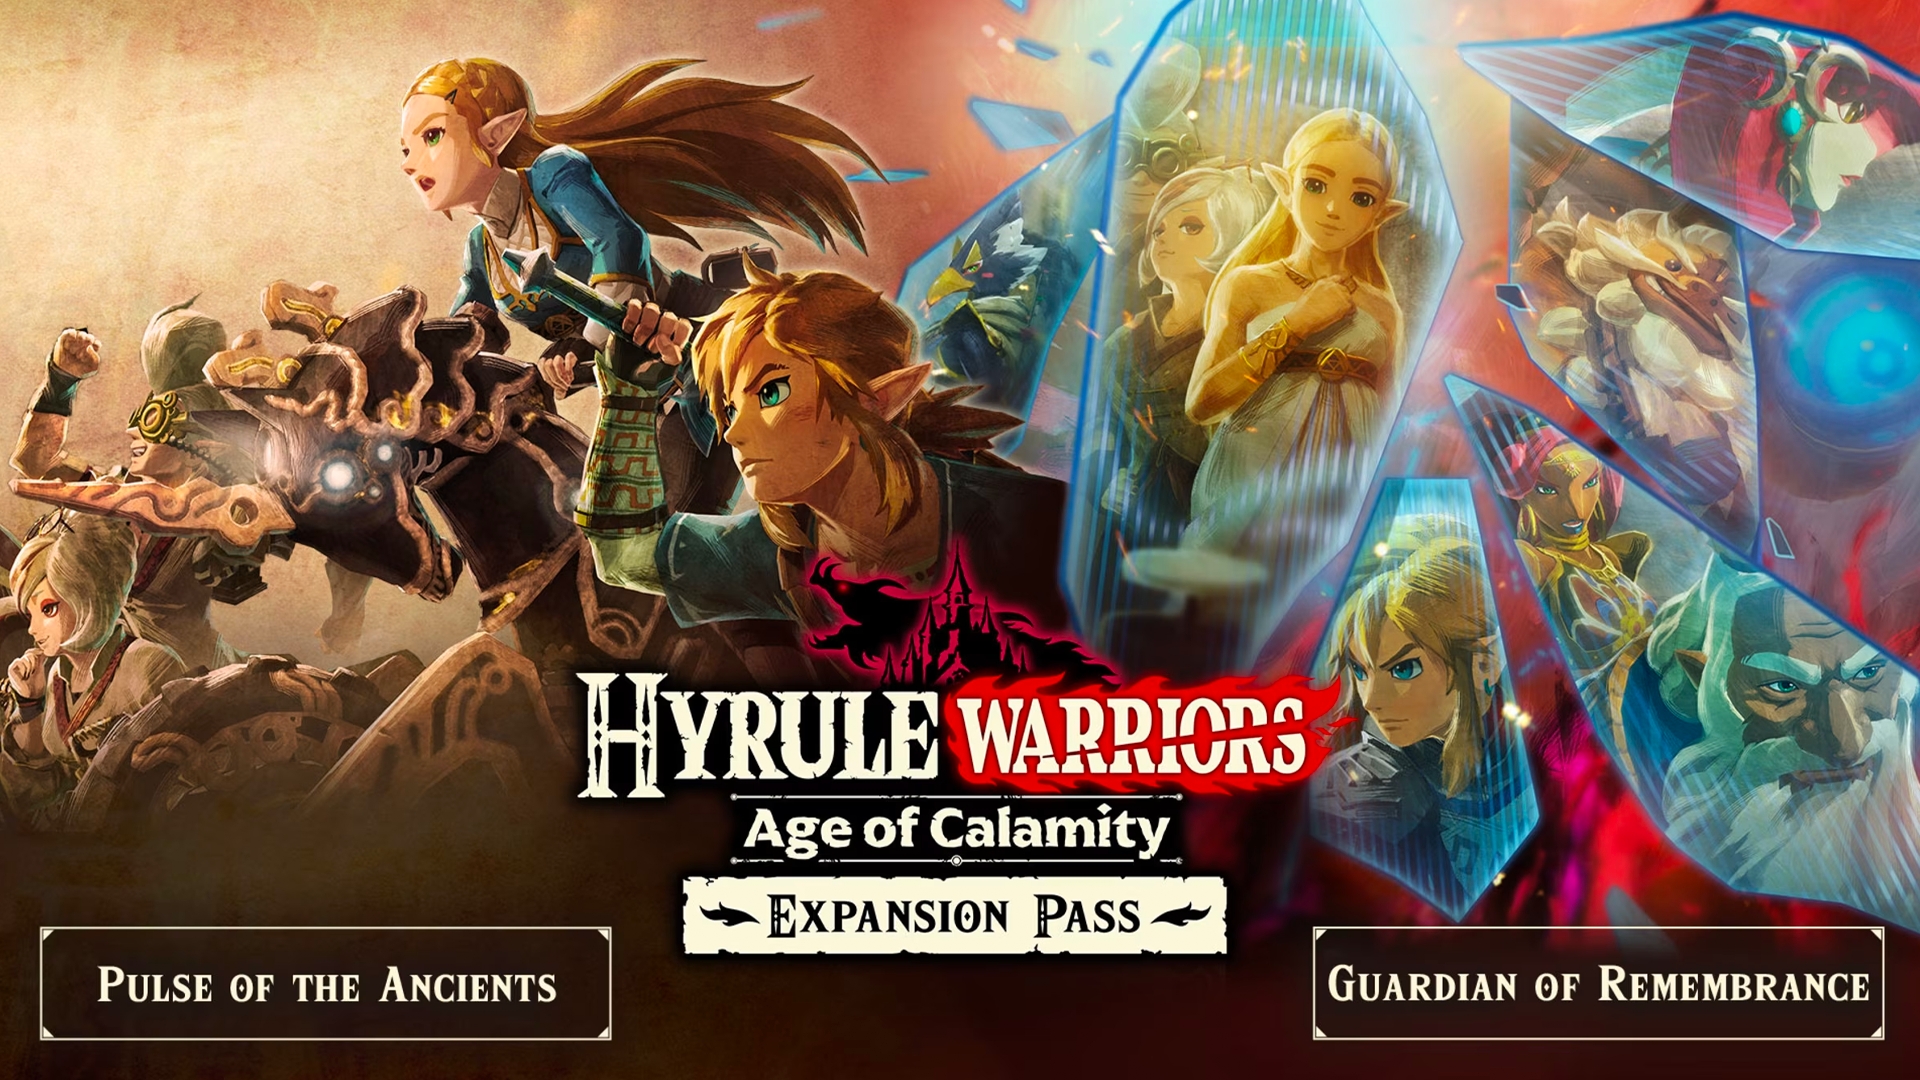 Age Pass Nintendo Warriors of Hyrule Calamity Buy Eshop Expansion Switch